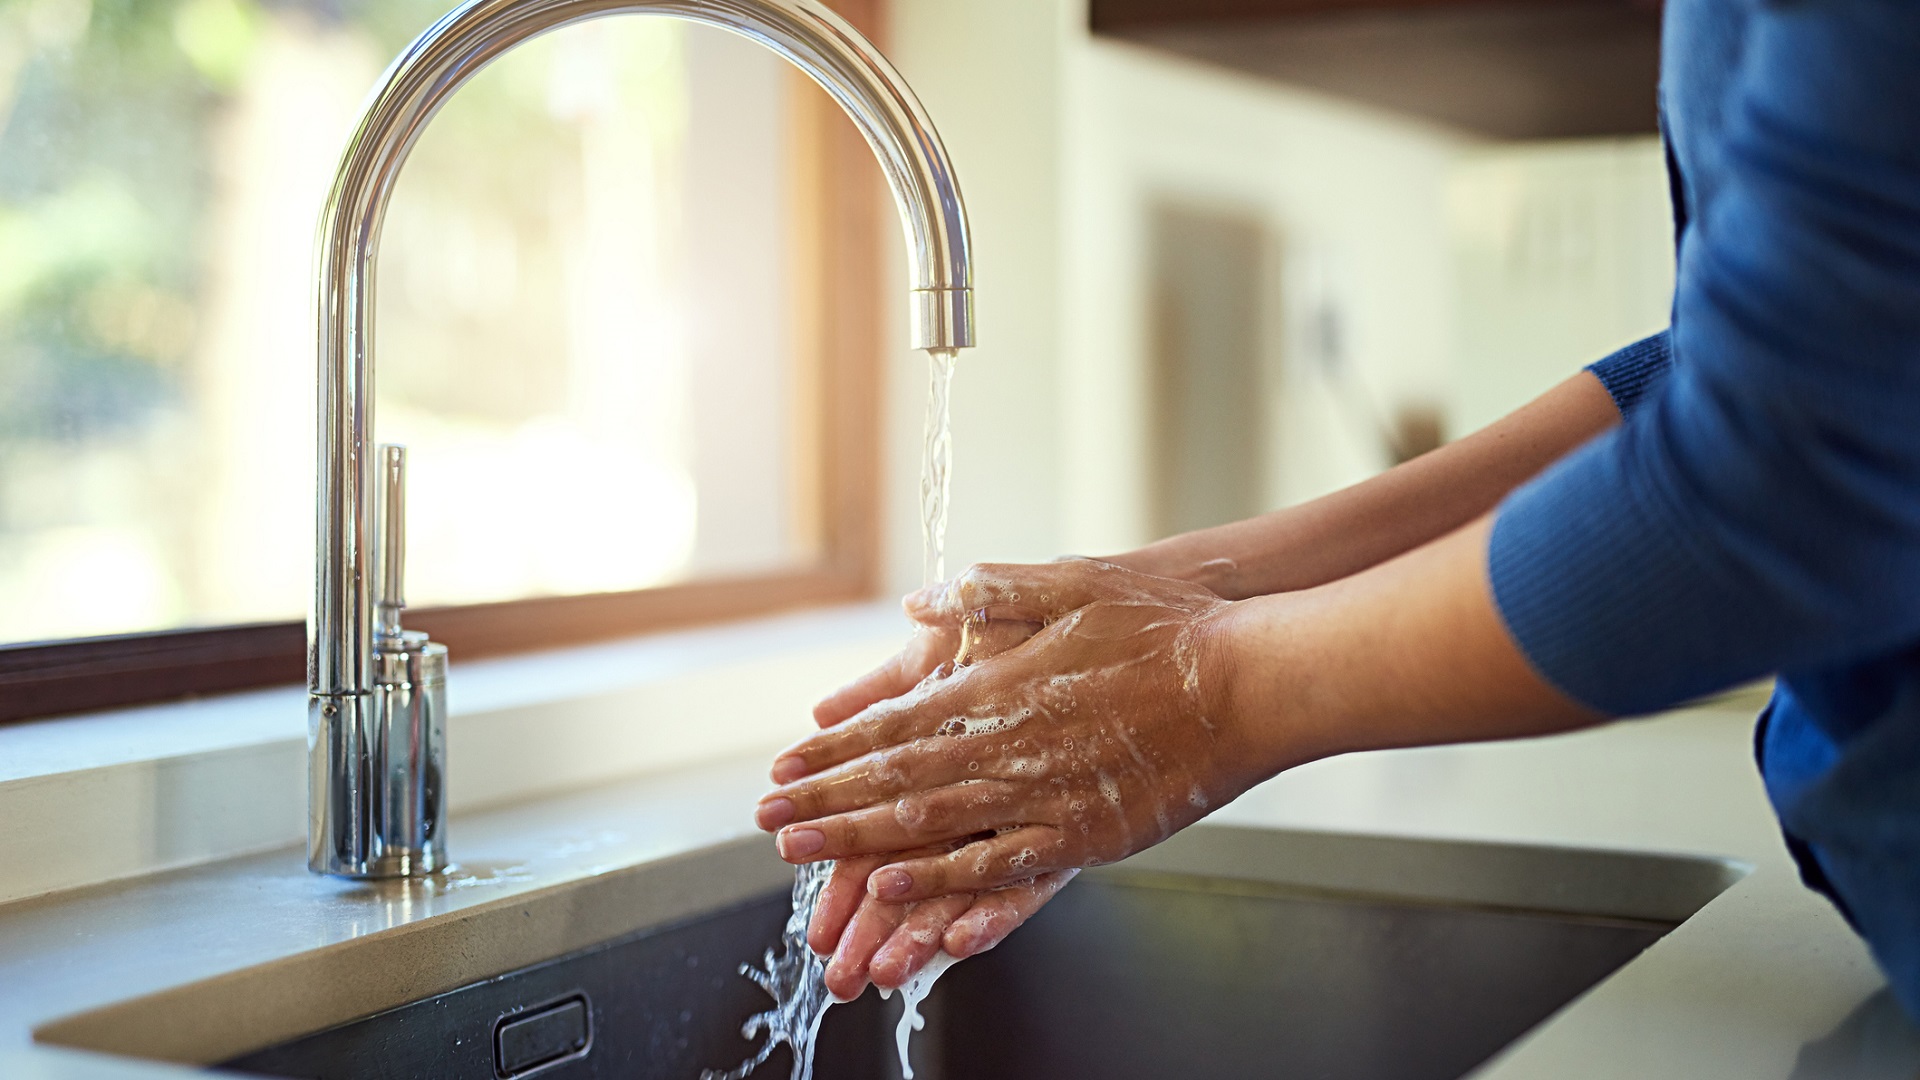 A woman demonstrating effective handwashing technique in a kitchen sink.